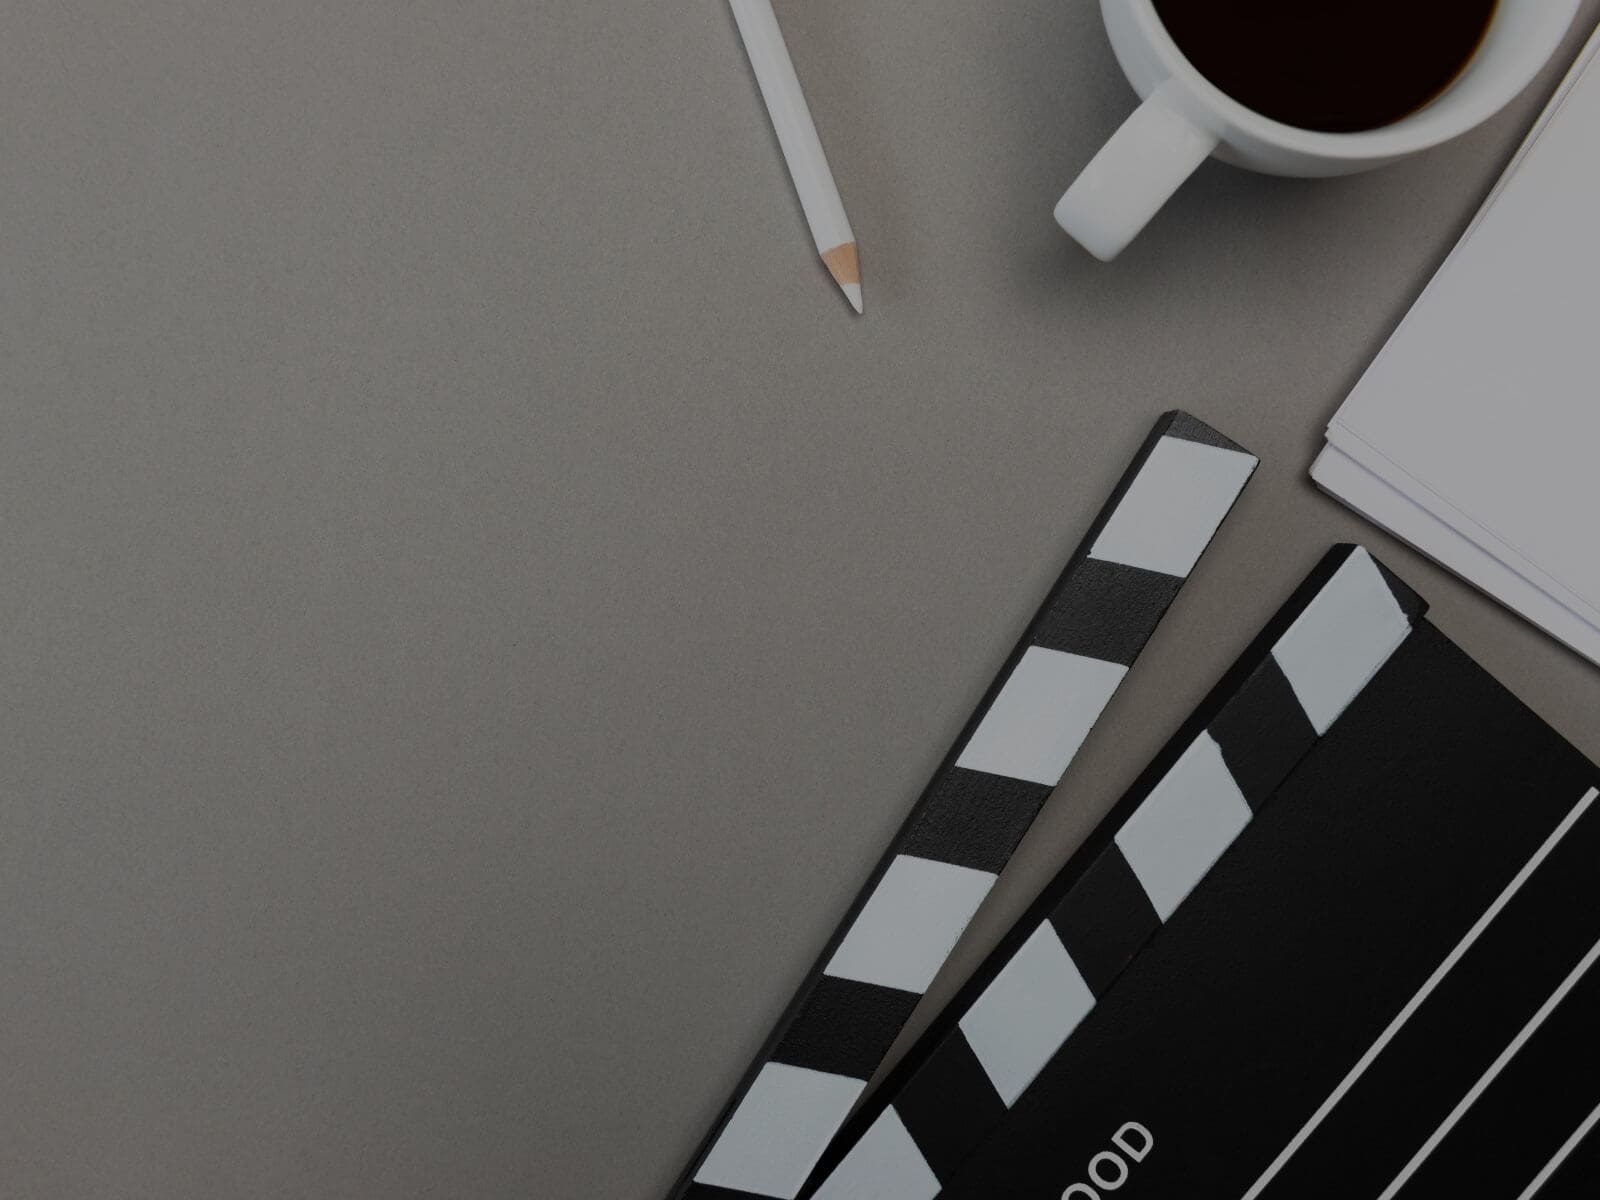 What Is The Need For A Digital Brand Film?